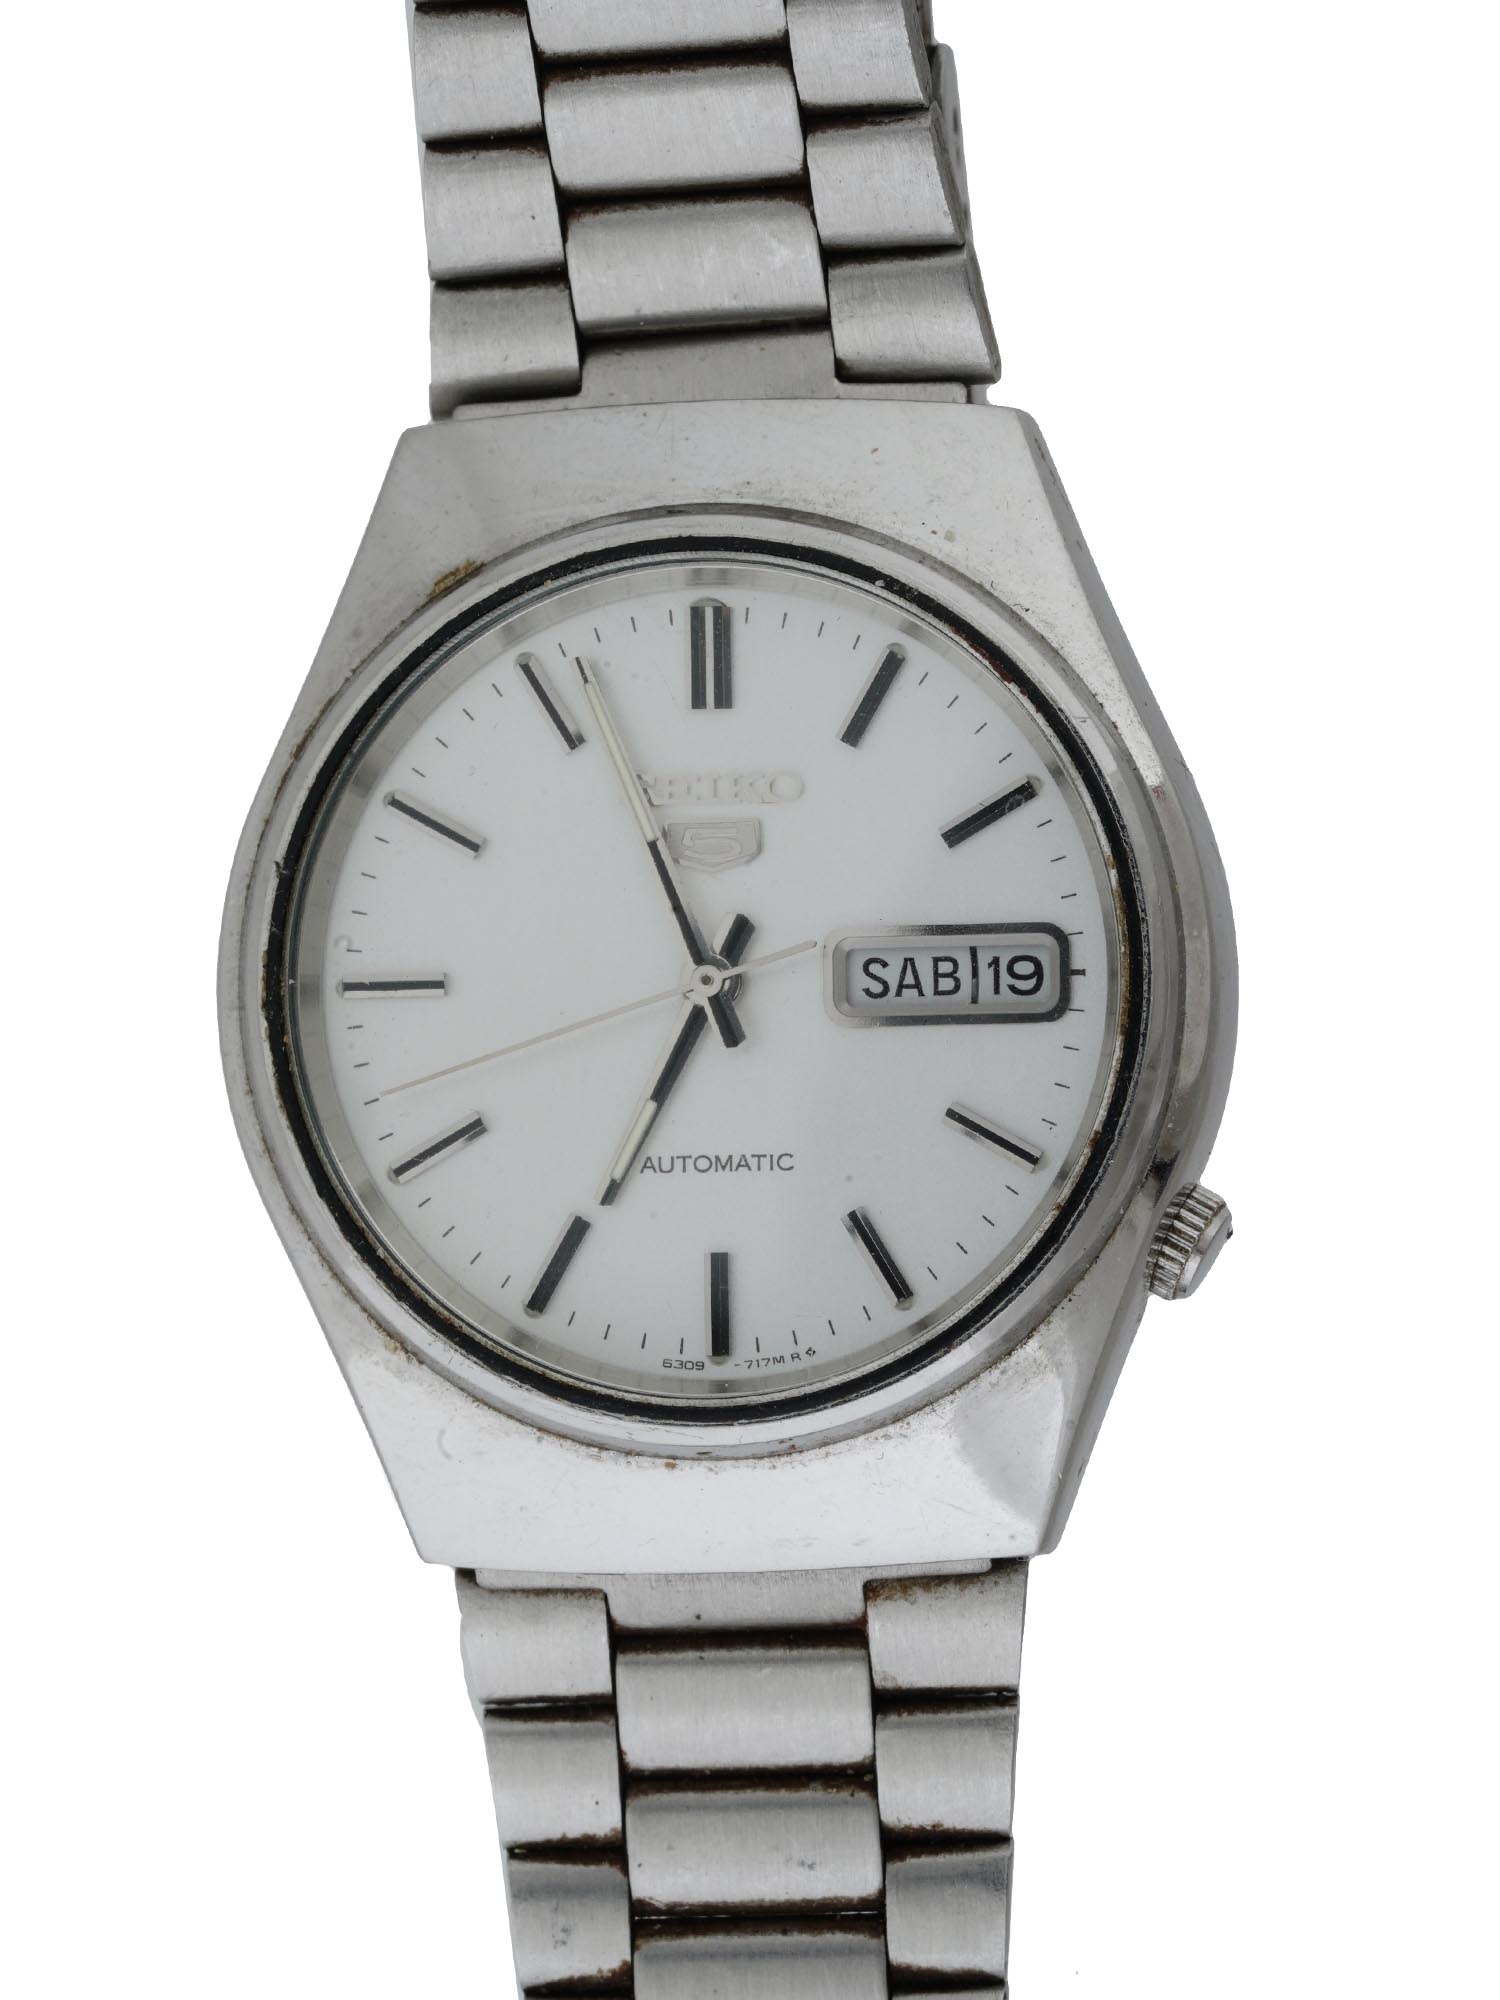 1980S SEIKO STAINLESS STEEL AUTOMATIC WRISTWATCH PIC-4